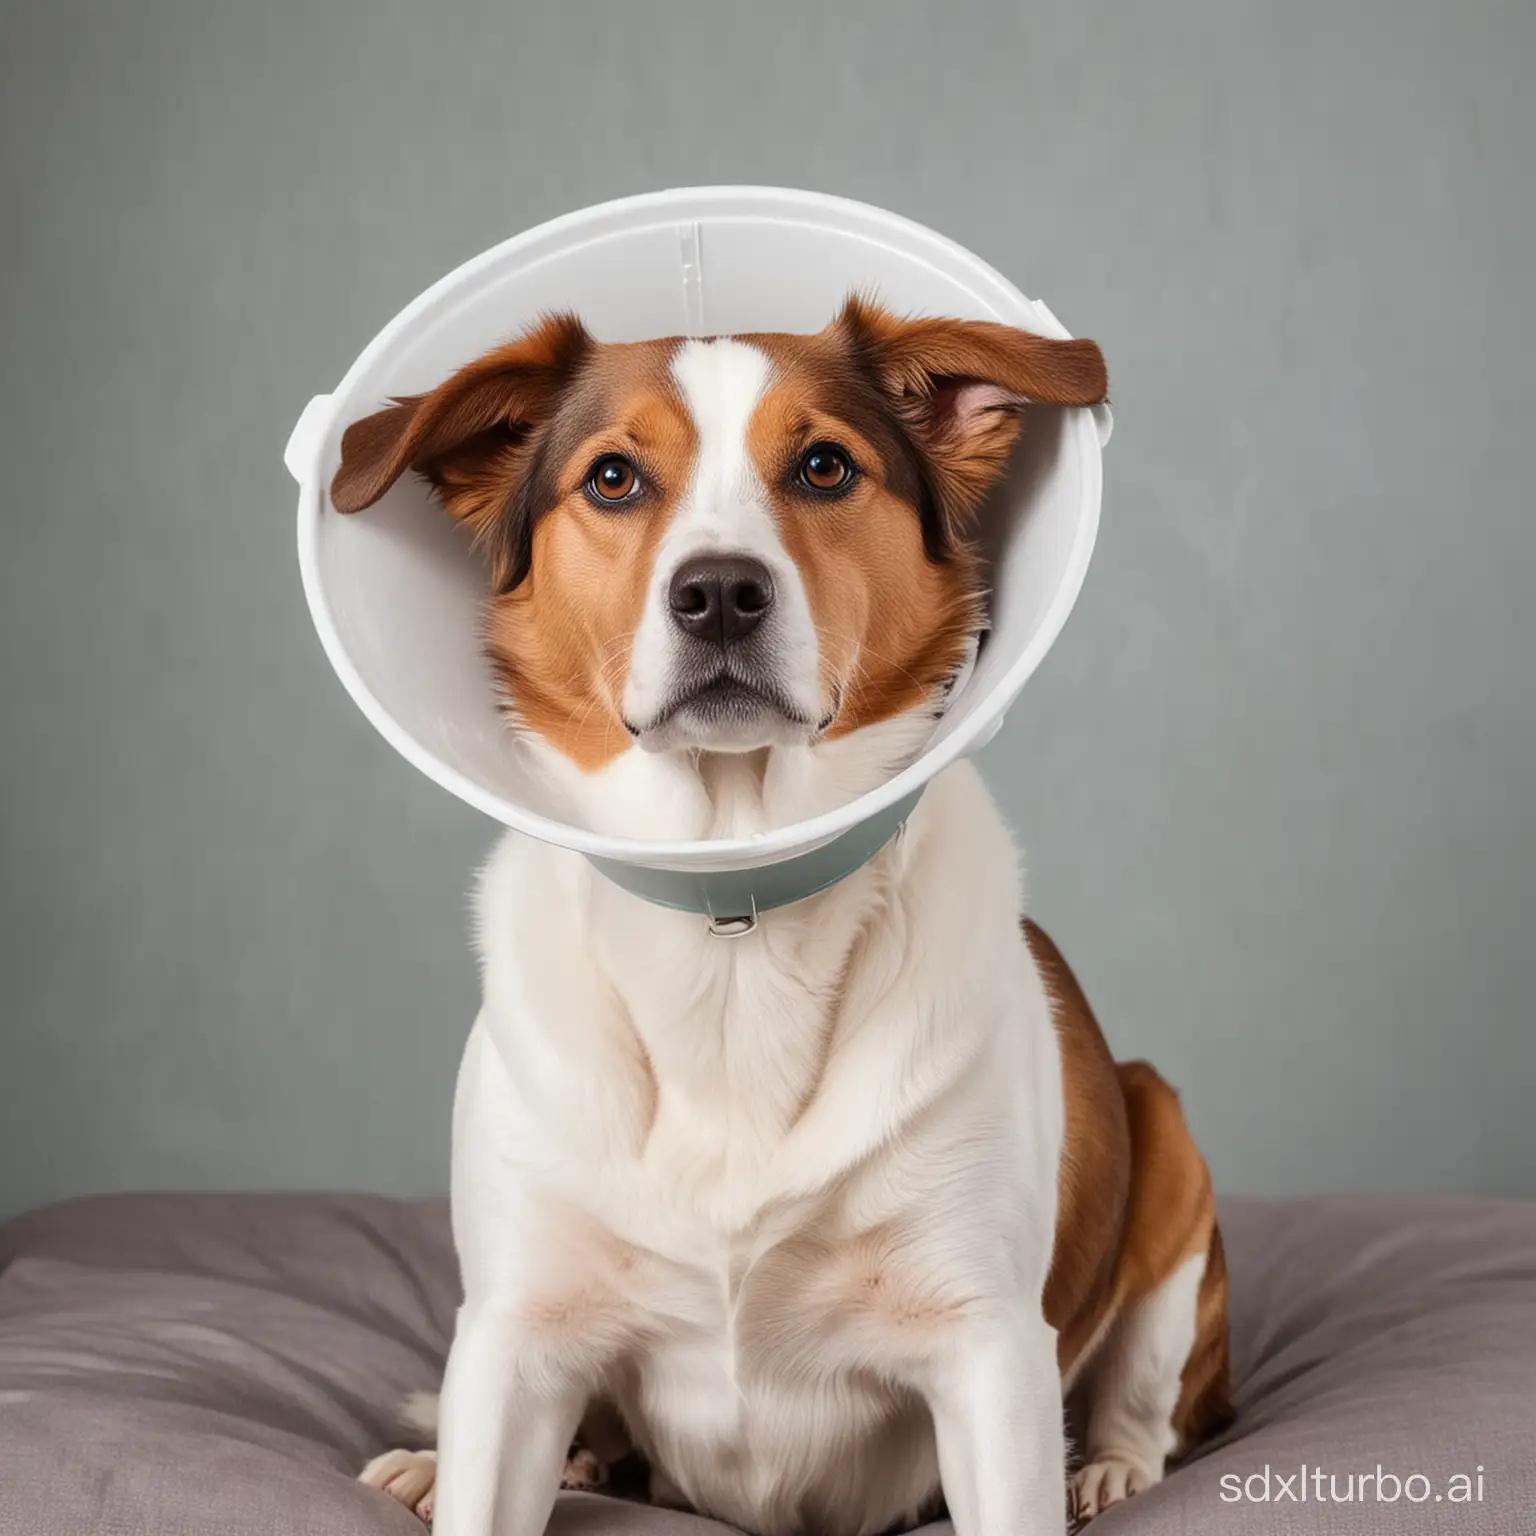 Dog-Wearing-Protective-Collar-Due-to-Illness